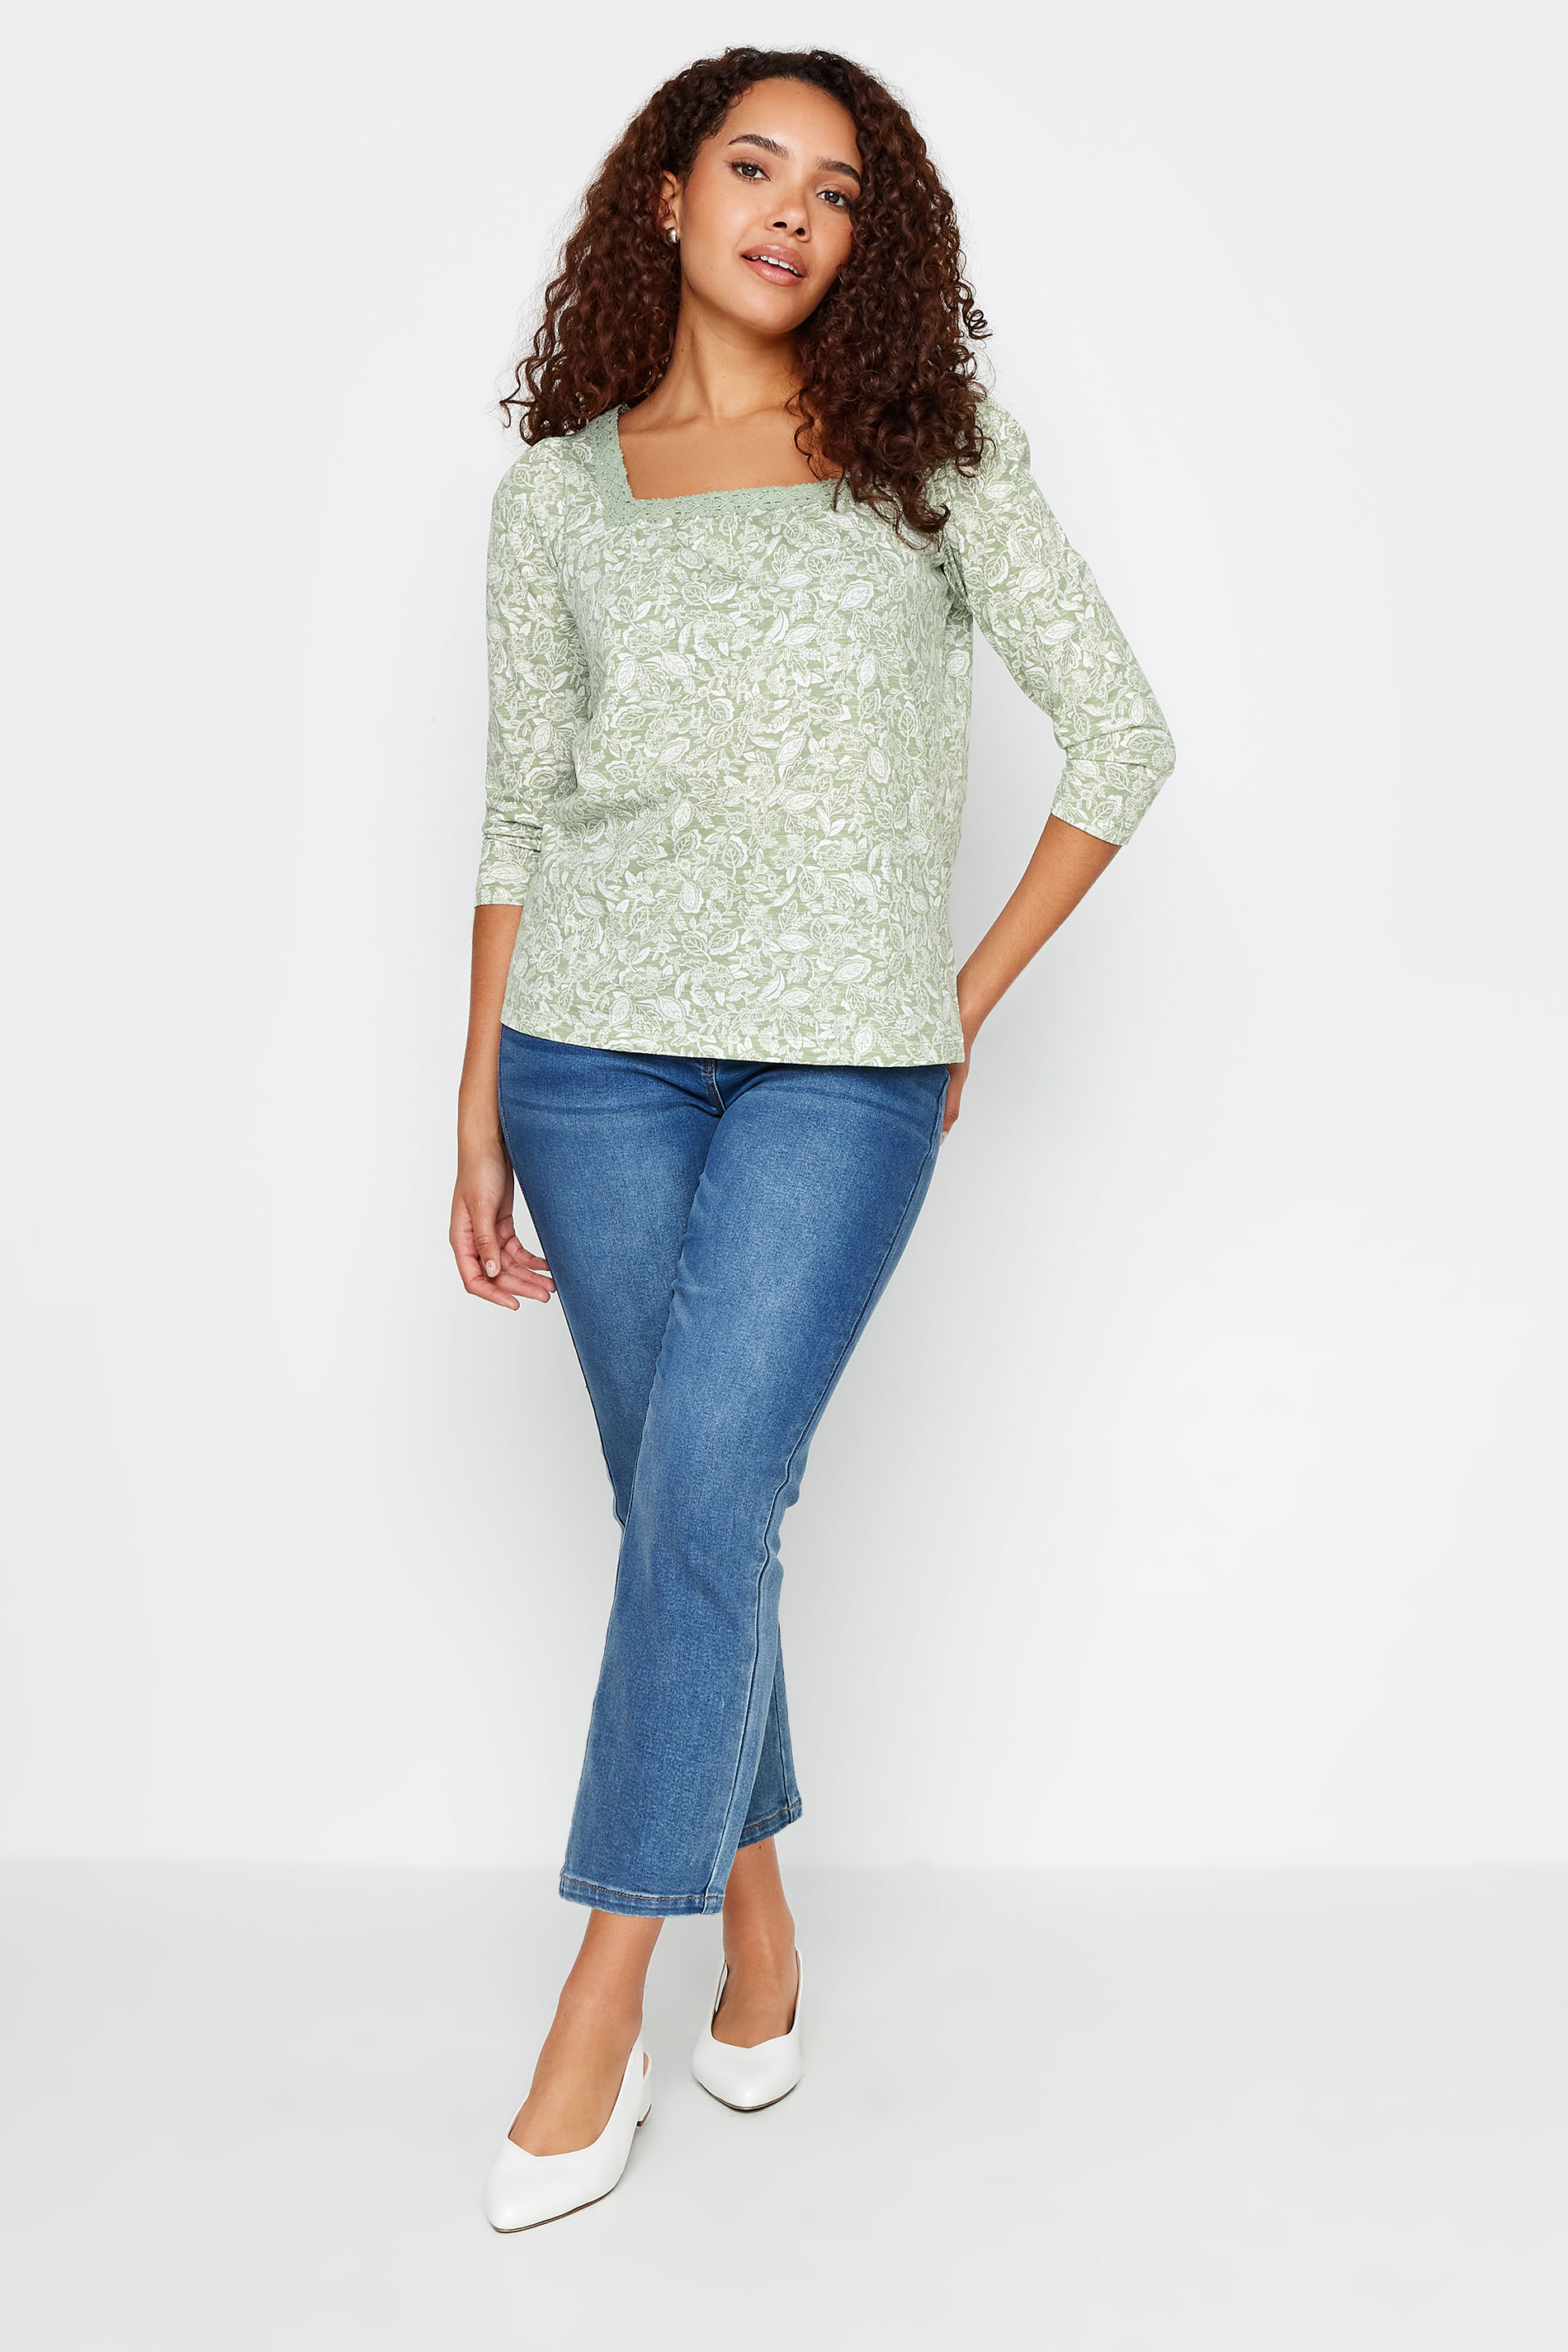 M&Co Green Floral Print Square Neck 3/4 Sleeve Top | M&Co 2